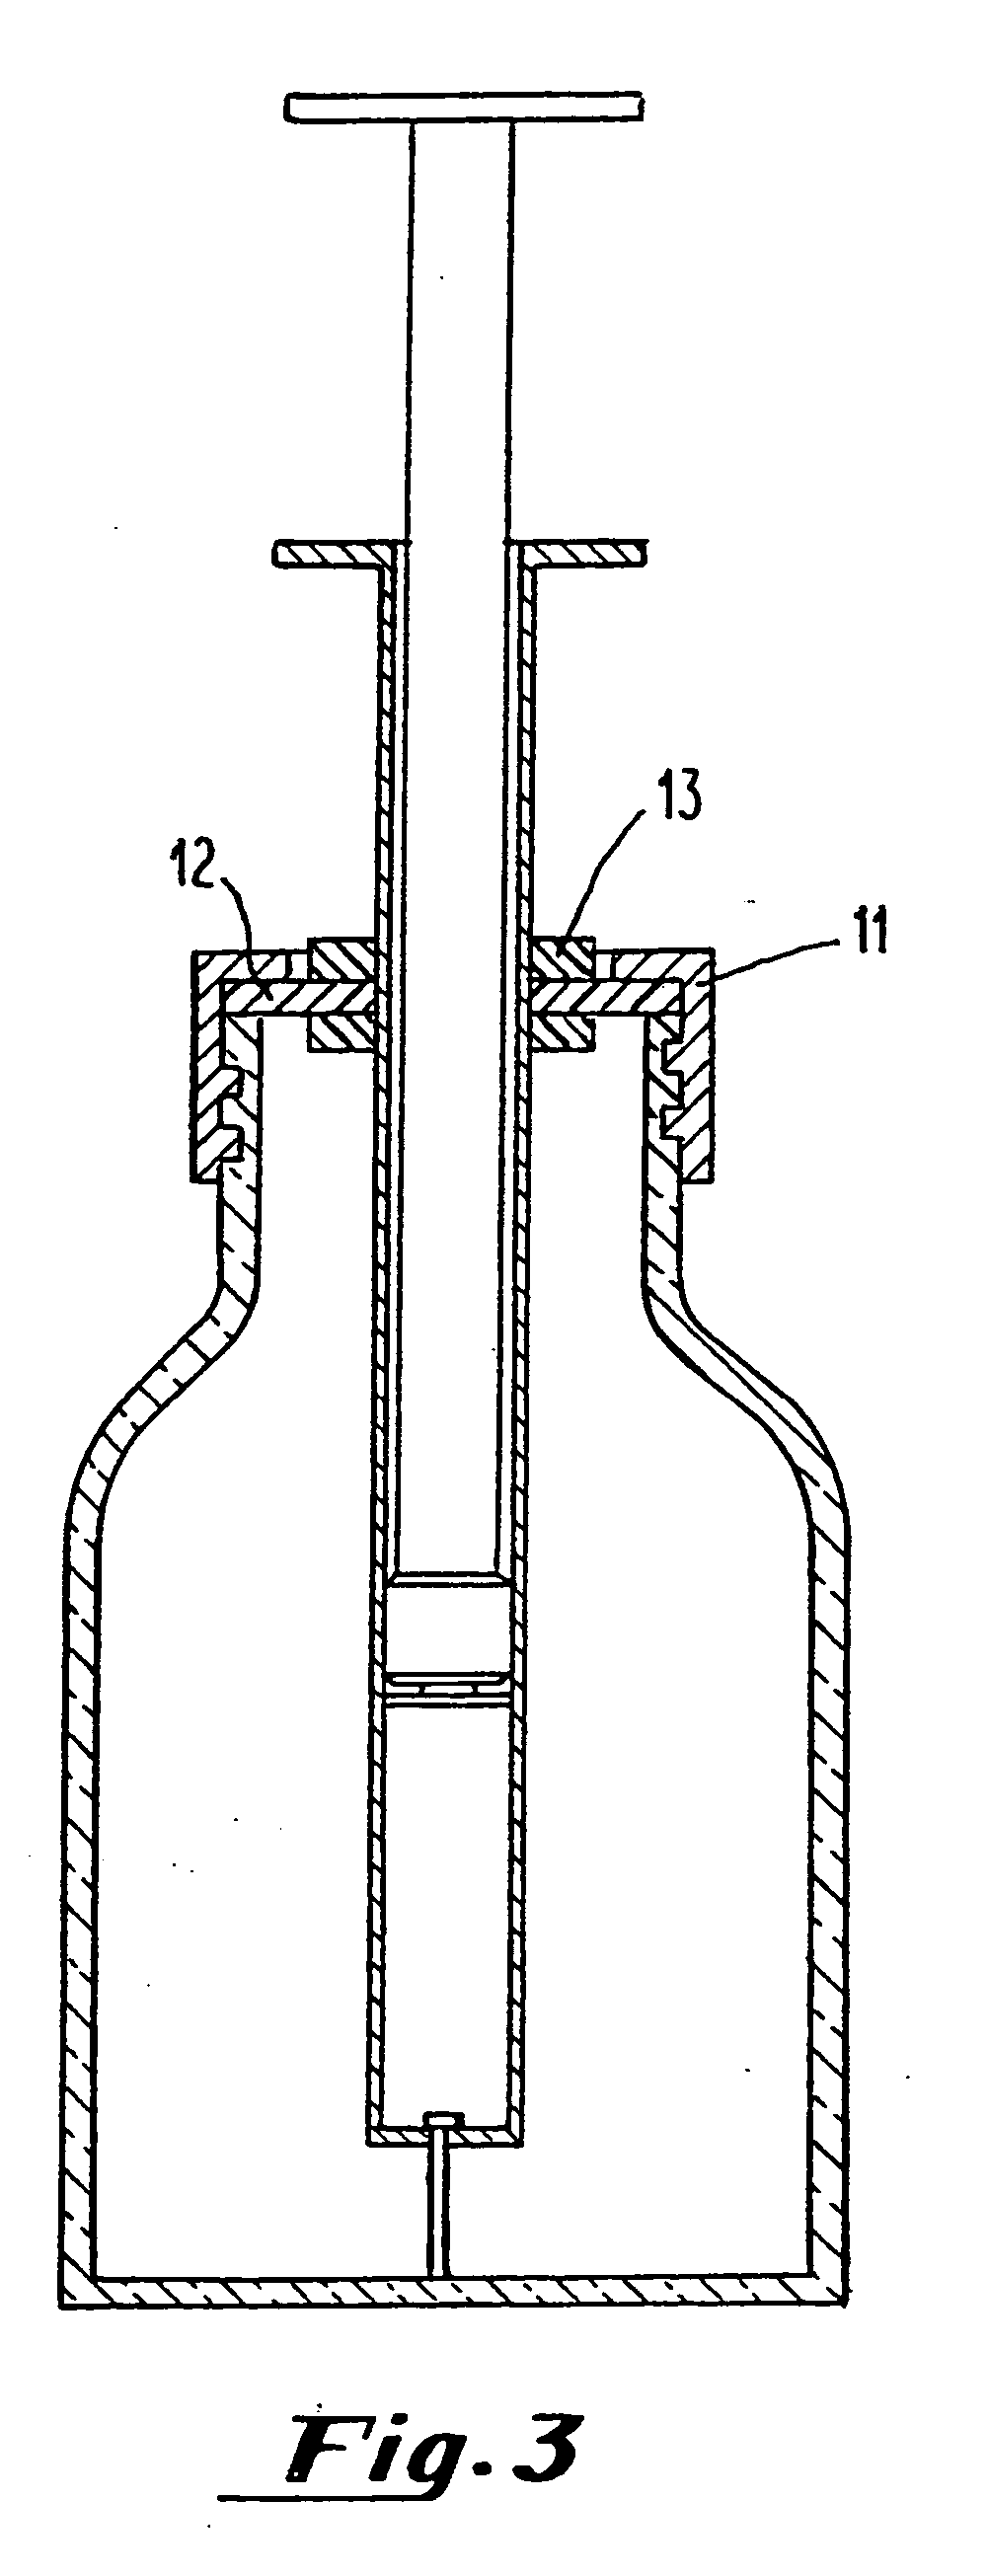 Methods and formulations for the efficient delivery of drugs by nebulizer